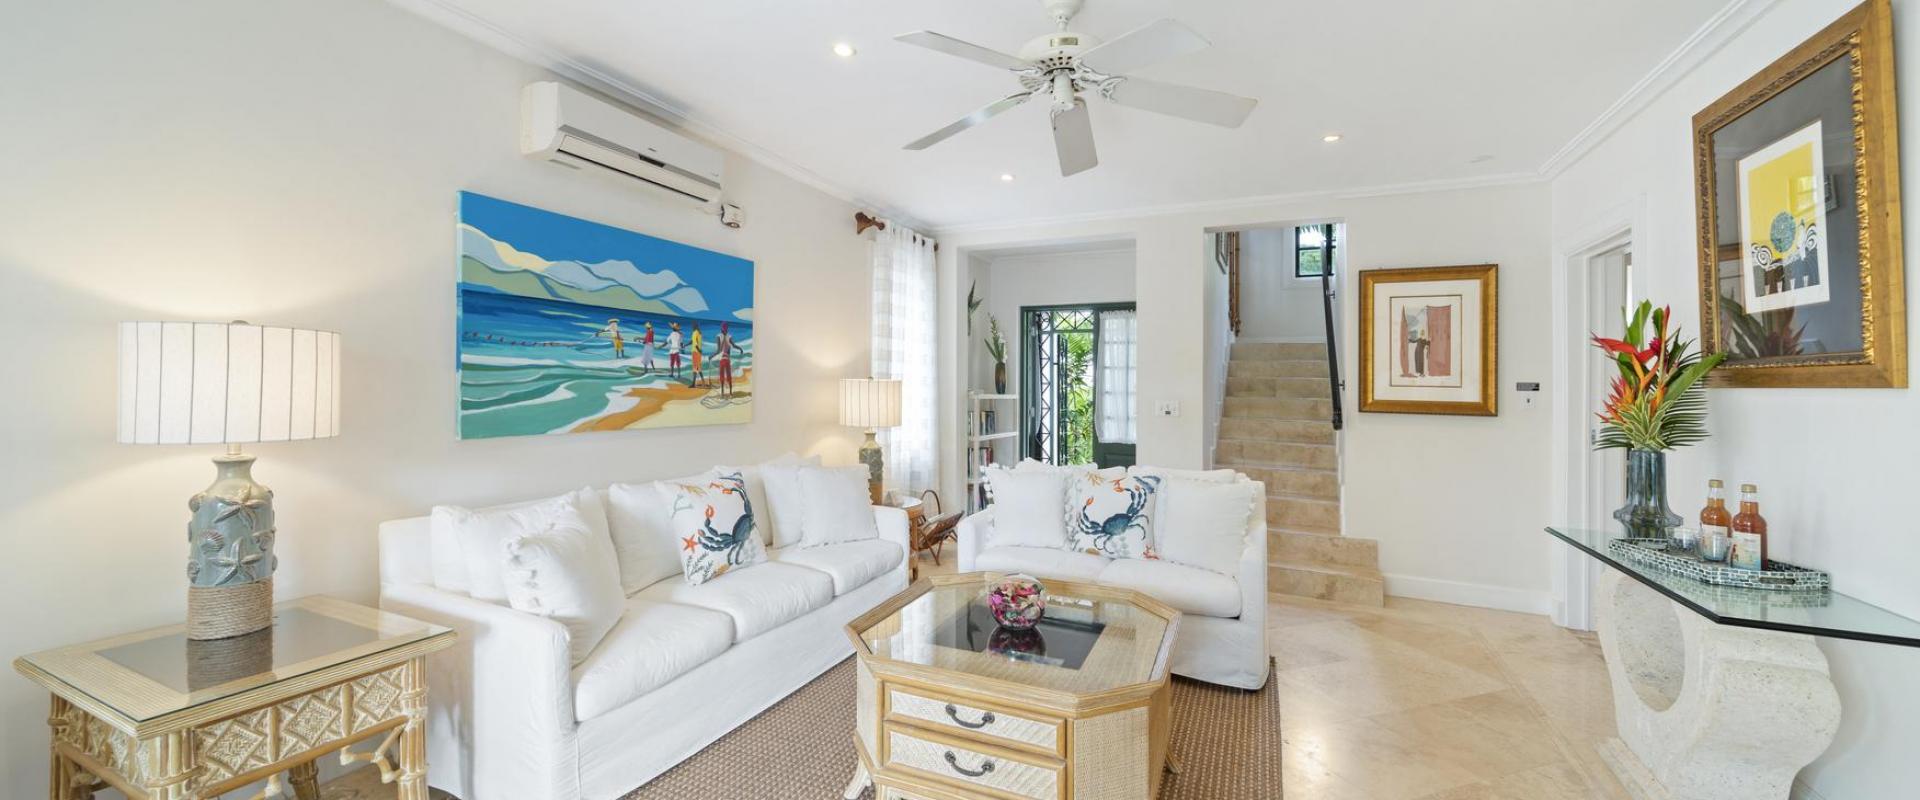 Hummingbird Villa Mullins Bay Barbados Living Room With Stairs to Upstairs Bedrooms